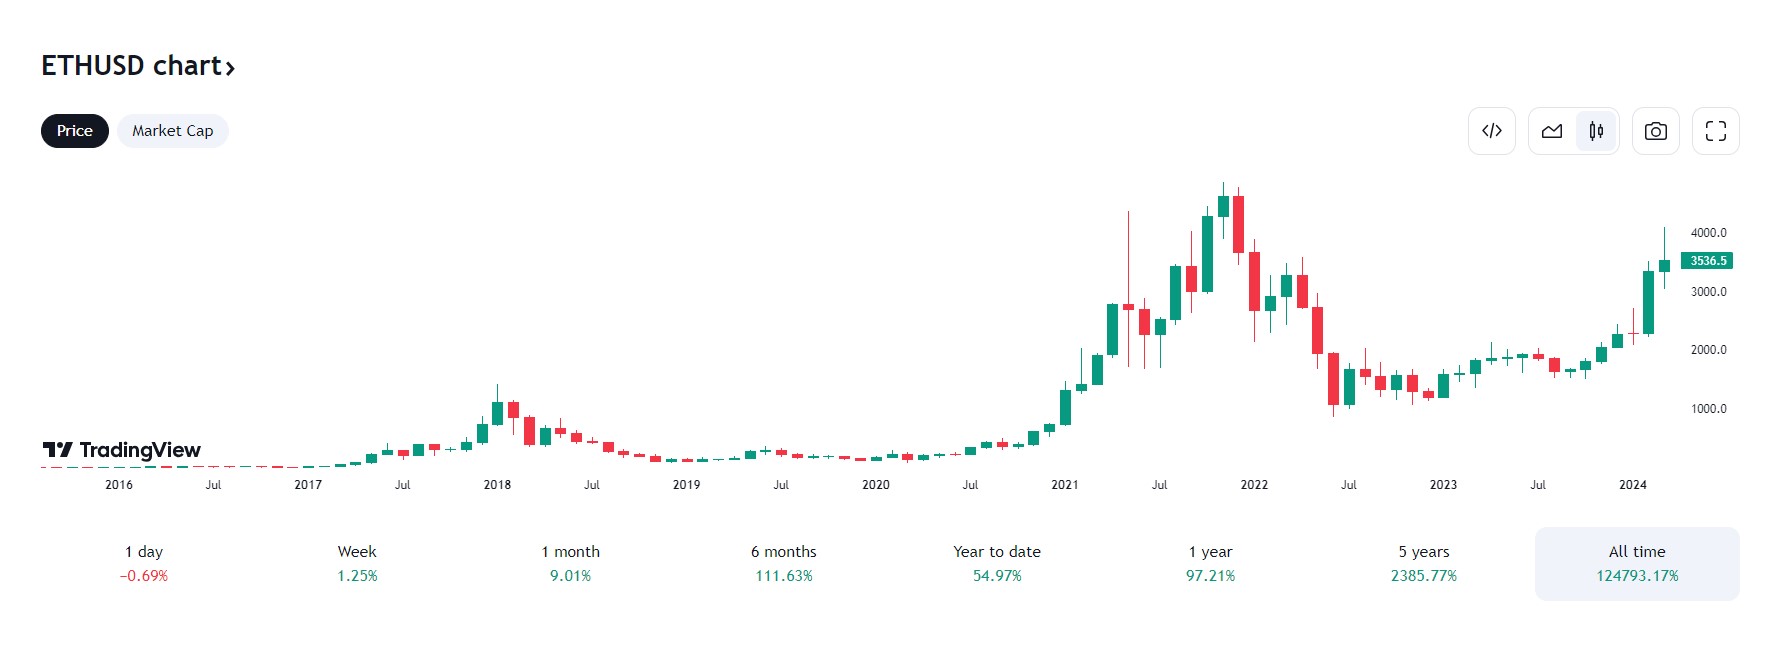 ETH charts from the end of 2017 to now